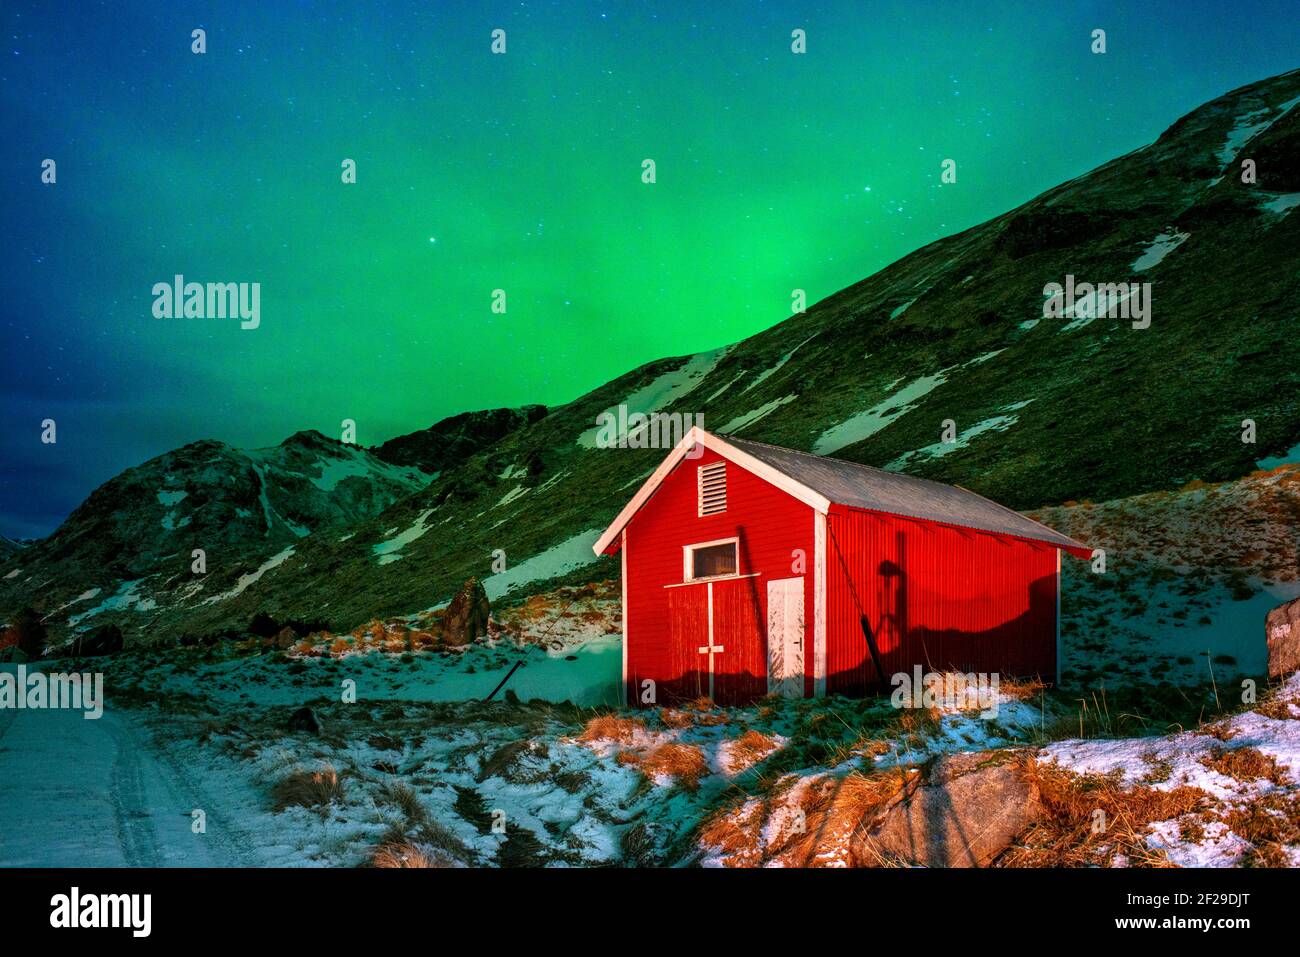 Northern lights or Aurora Borealis over atypical red houses rorbu, Svolvaer Lofoten Norway Stock Photo